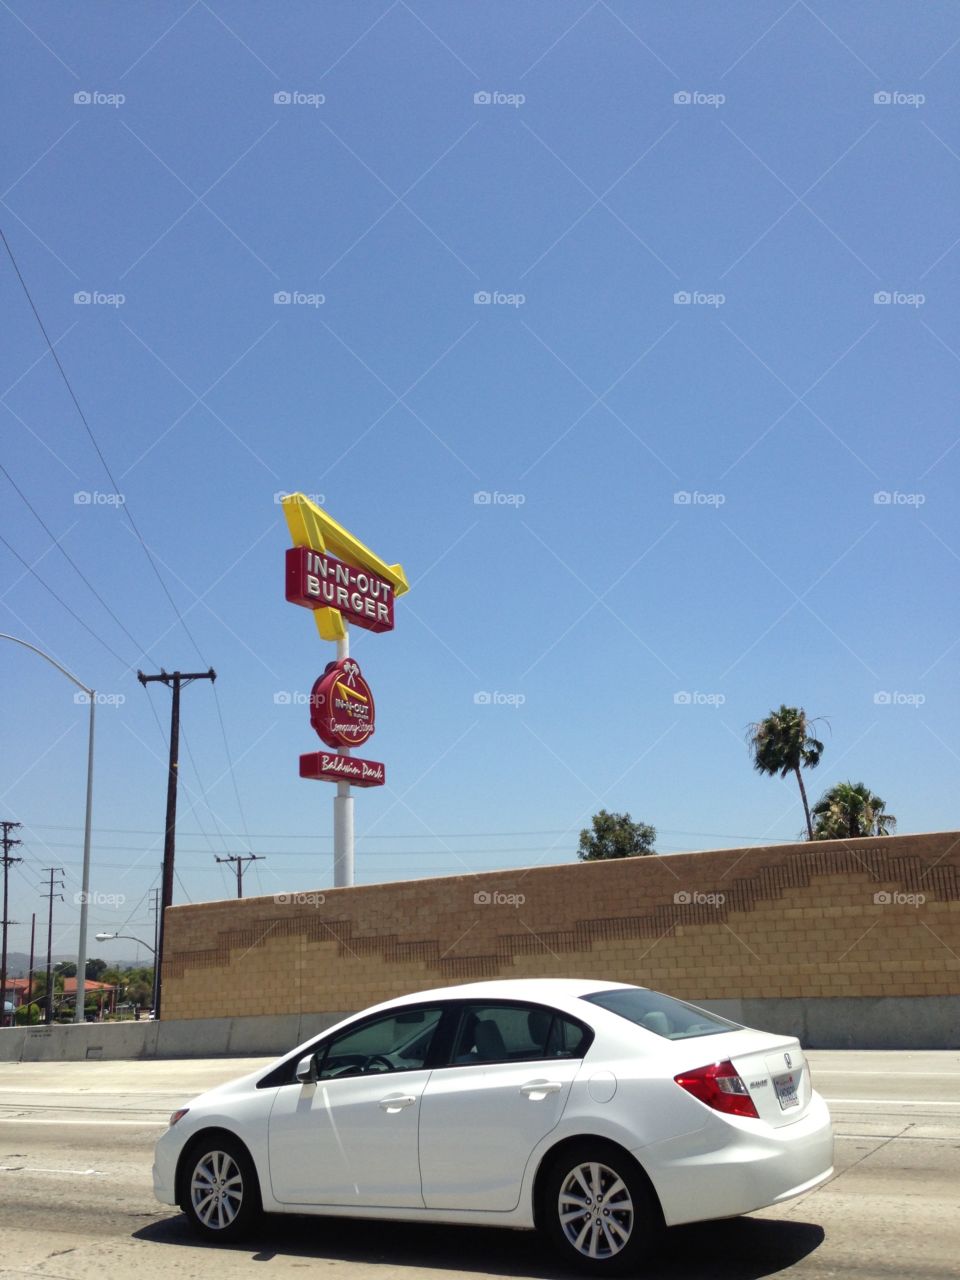 in-n-out burger sign